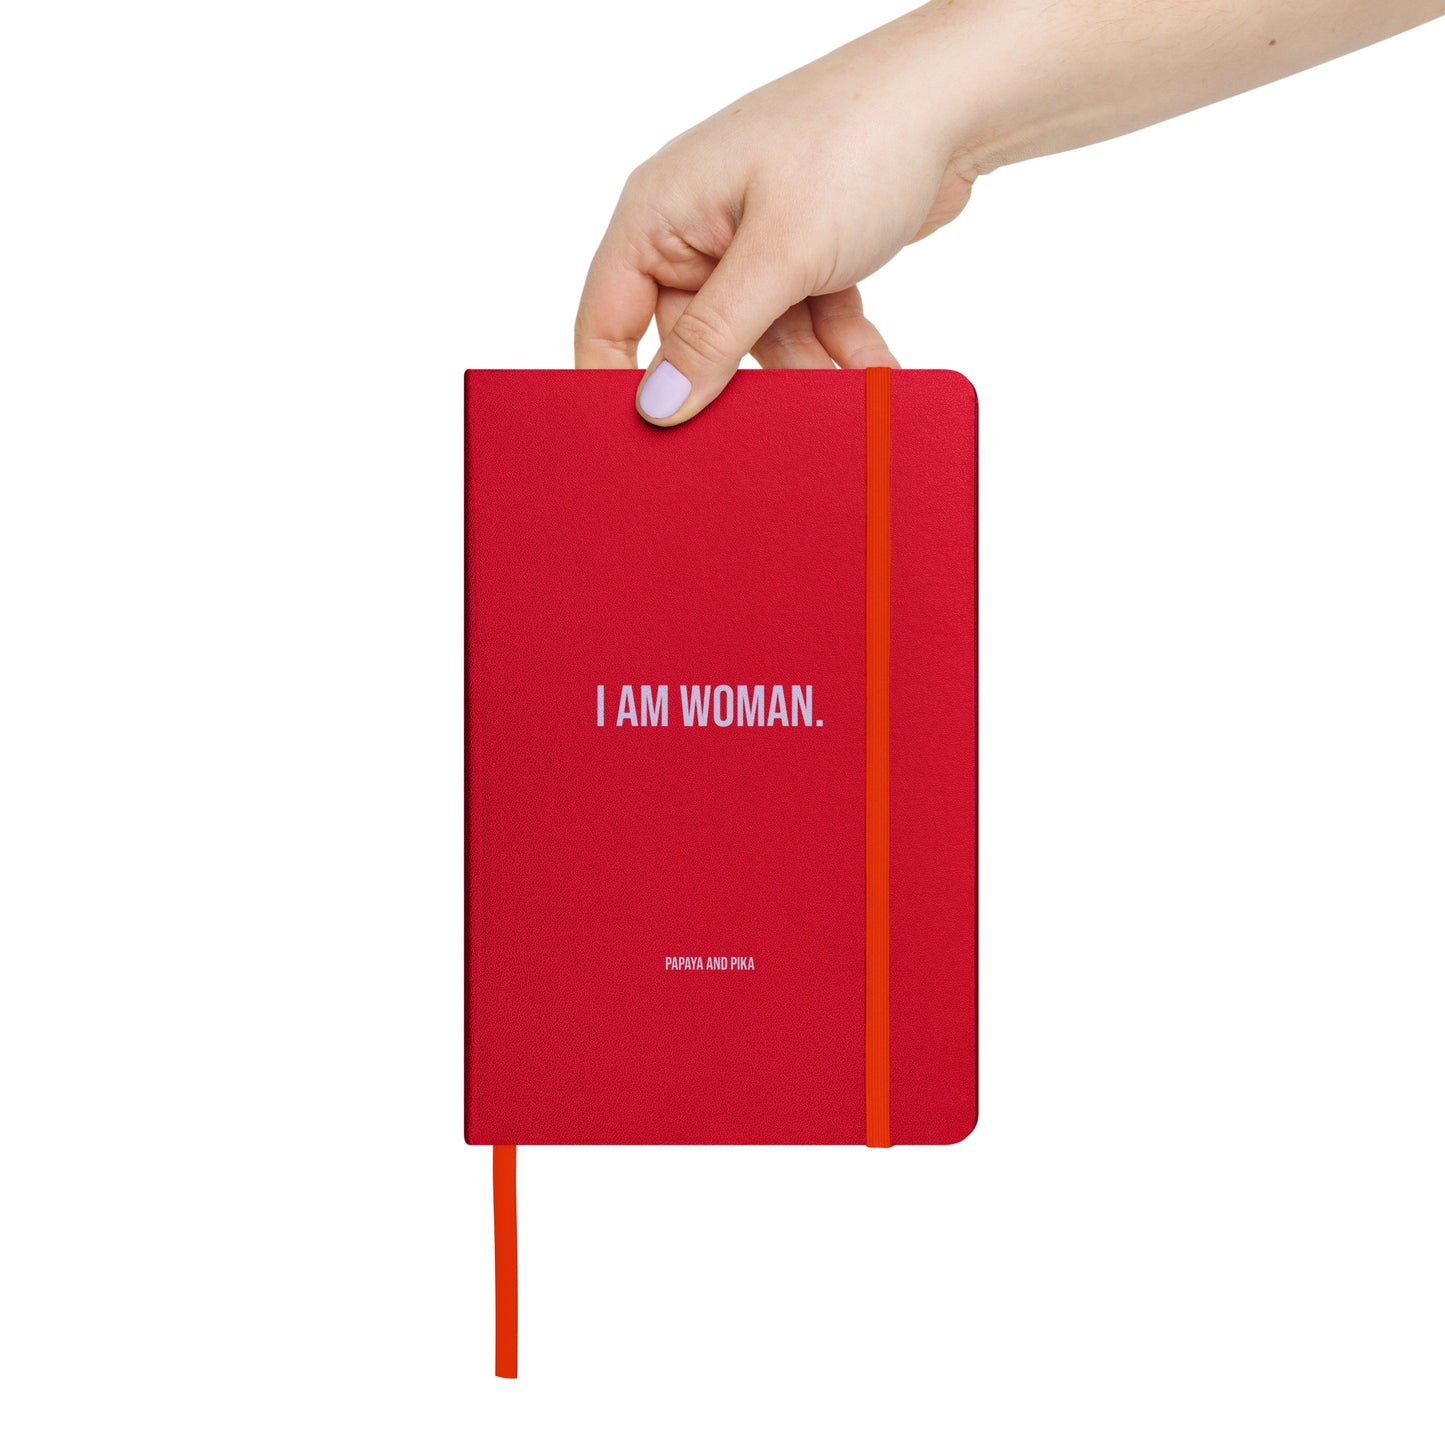 I am Woman | Hardcover Notebook